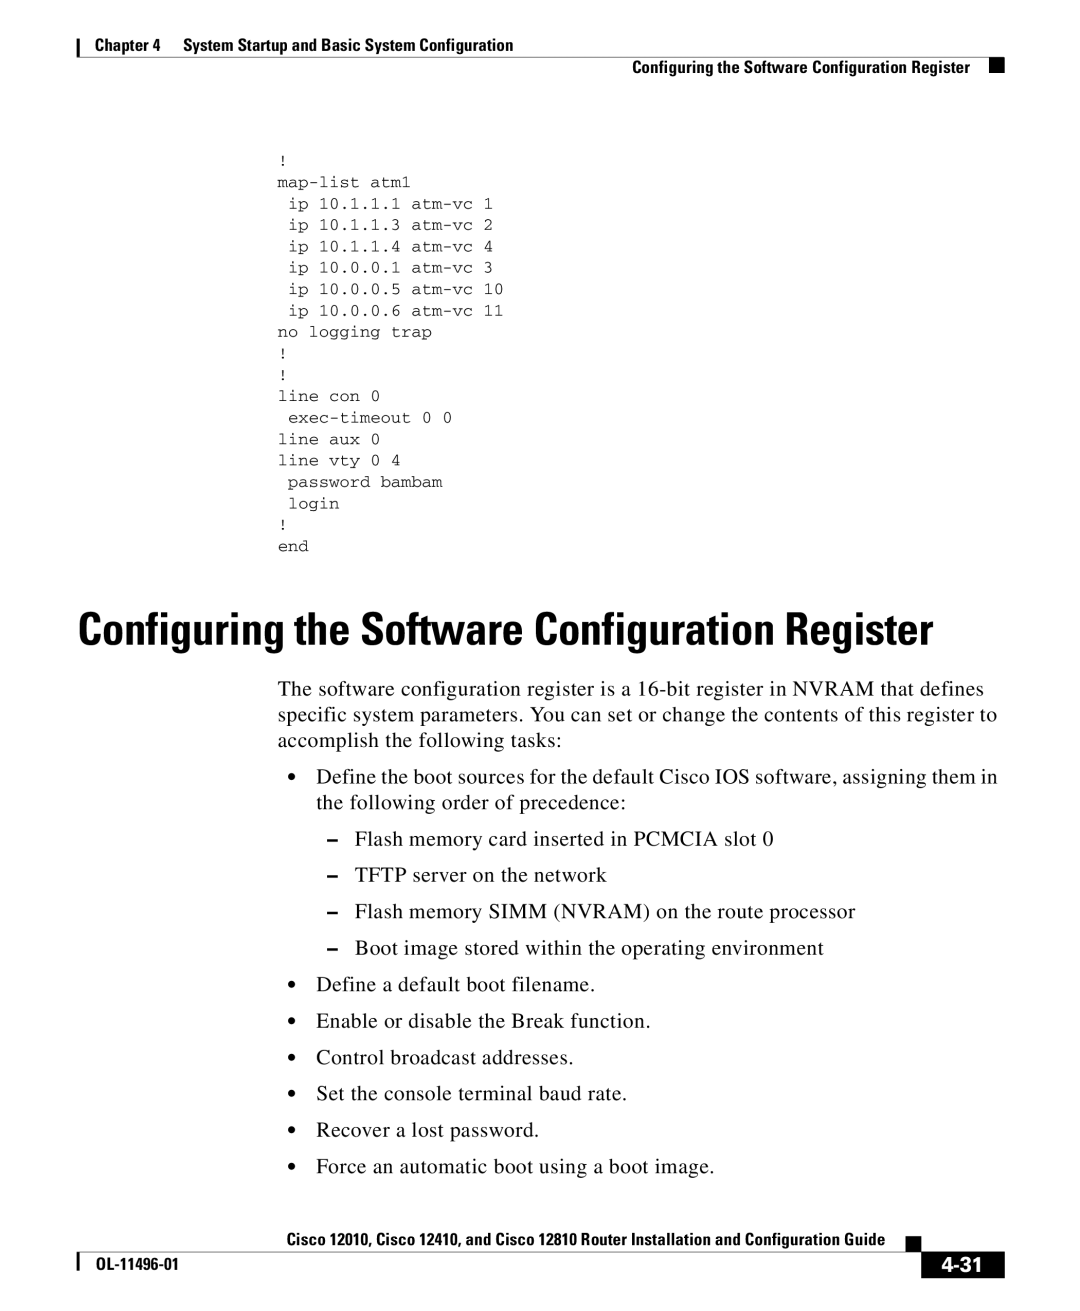 Cisco Systems 12810, 12010, 12410 manual Configuring the Software Configuration Register 